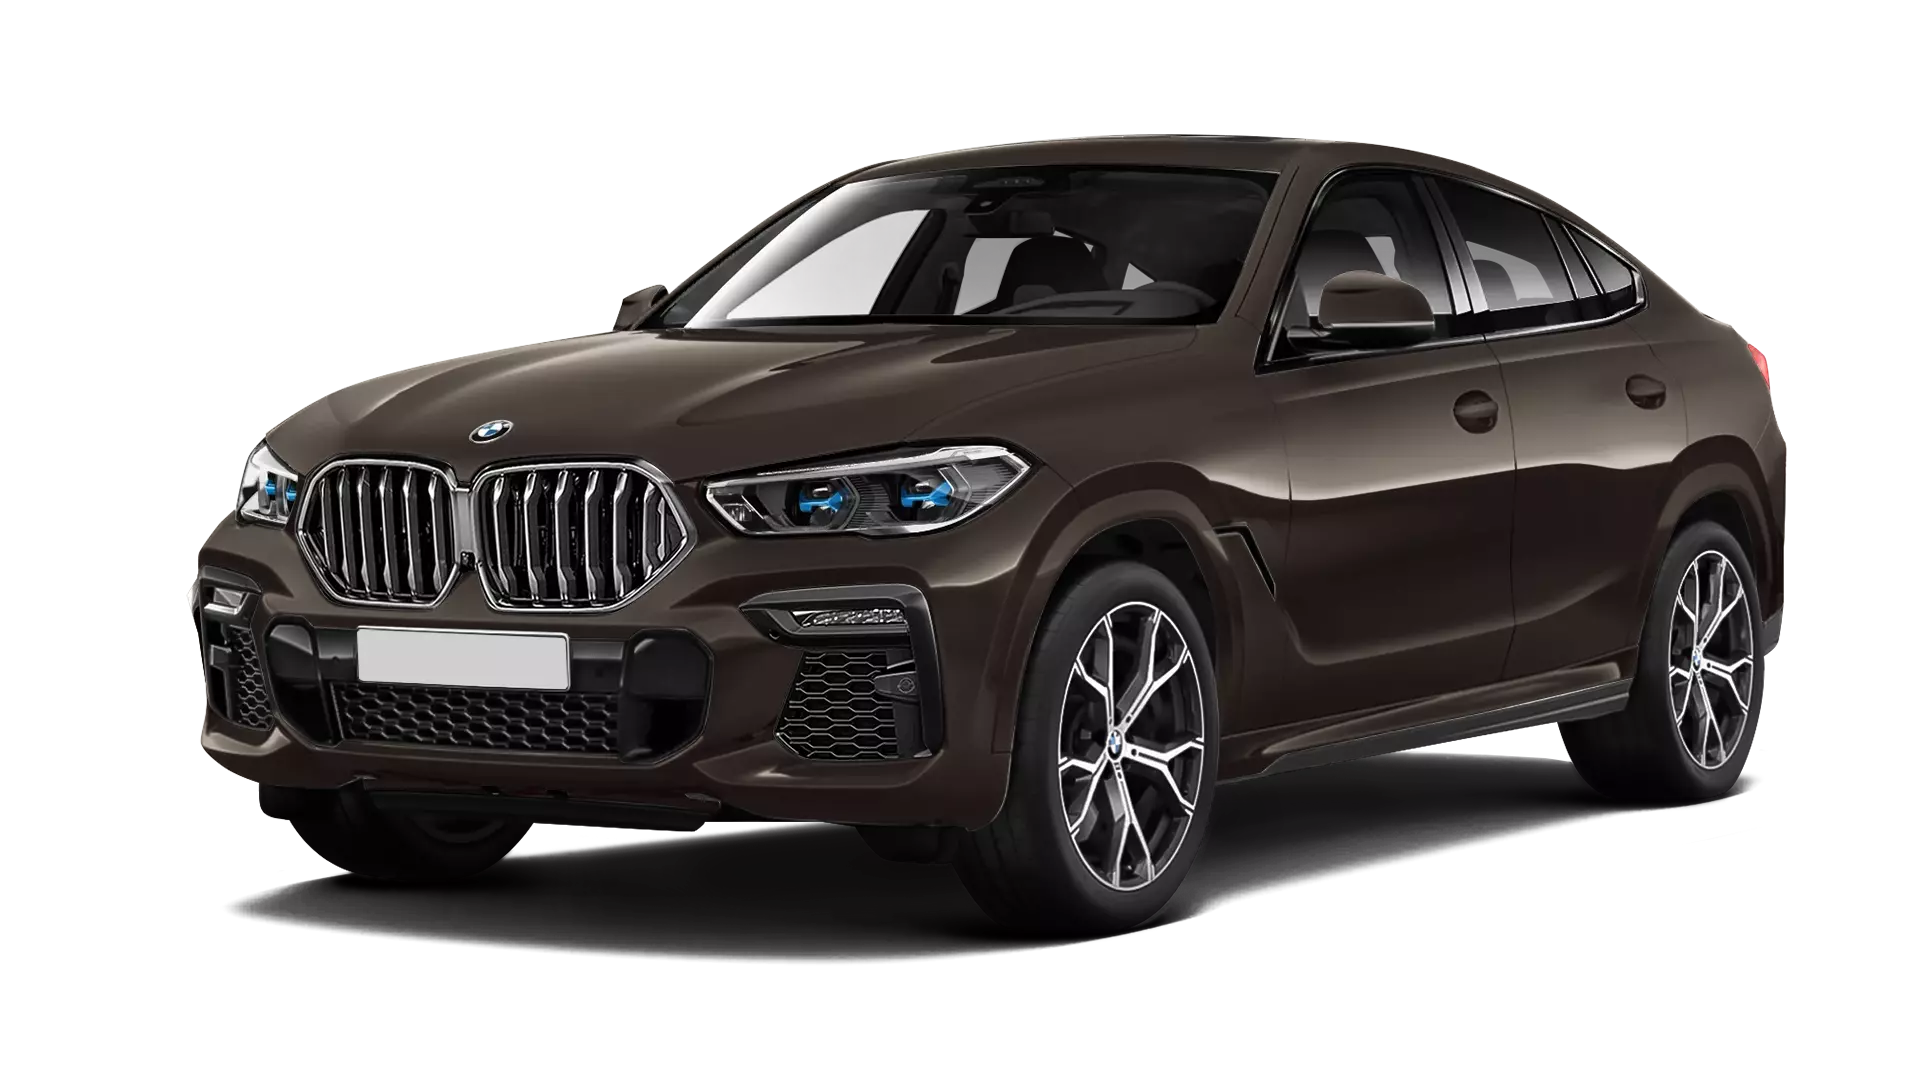 BMW X6 G06 stock front view in Sparkling Brown color